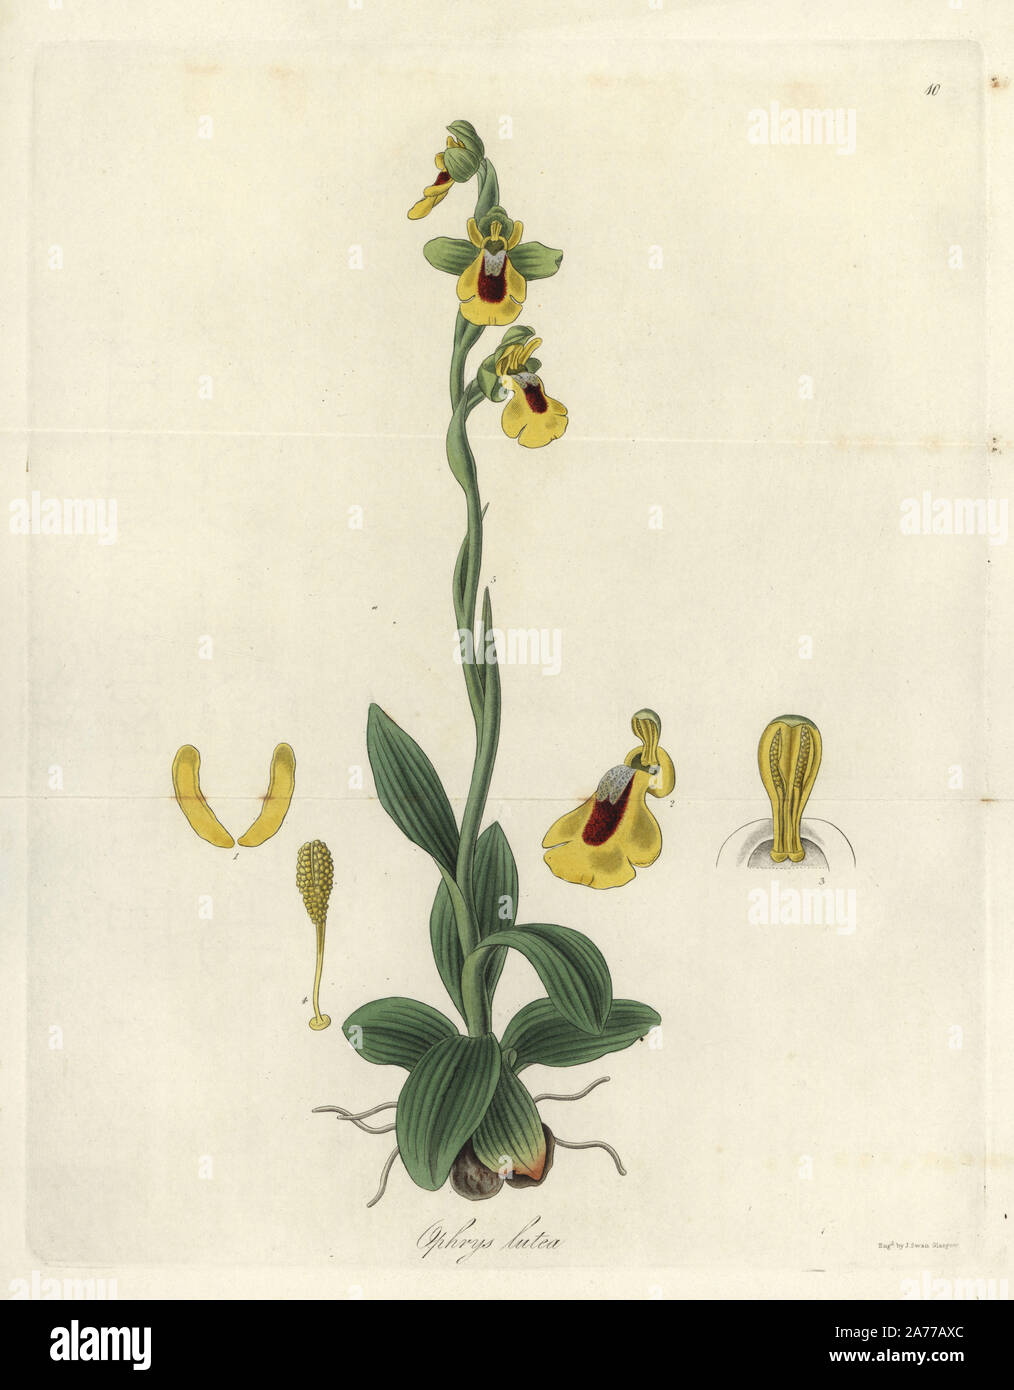 Yellow ophrys orchid, Ophrys lutea. Handcoloured copperplate engraving by J. Swan after a botanical illustration by William Jackson Hooker from his own 'Exotic Flora,' Blackwood, Edinburgh, 1823. Hooker (1785-1865) was an English botanist who specialized in orchids and ferns, and was director of the Royal Botanical Gardens at Kew from 1841. Stock Photo